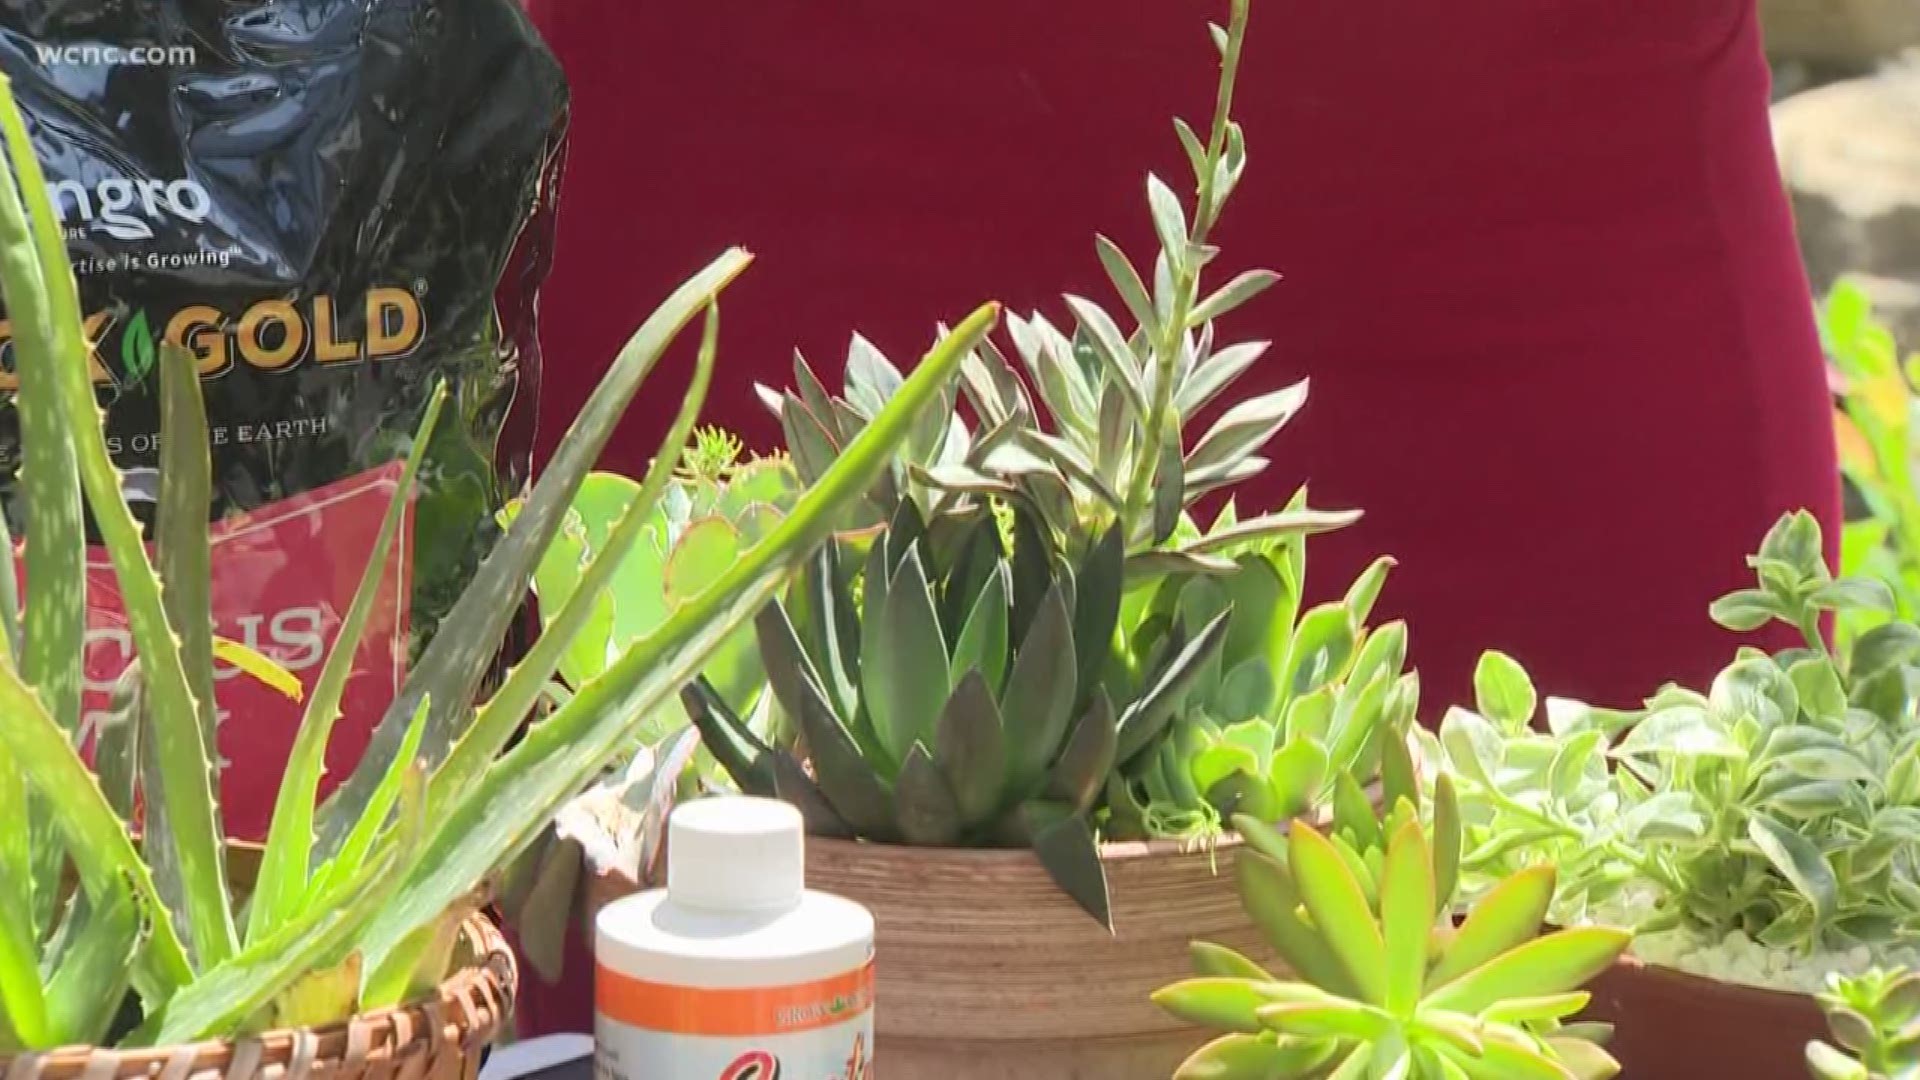 Succulents are popular because they’re beautiful and easy to care for. Pike Nursery shows us how to care for succulents and make your own container garden.